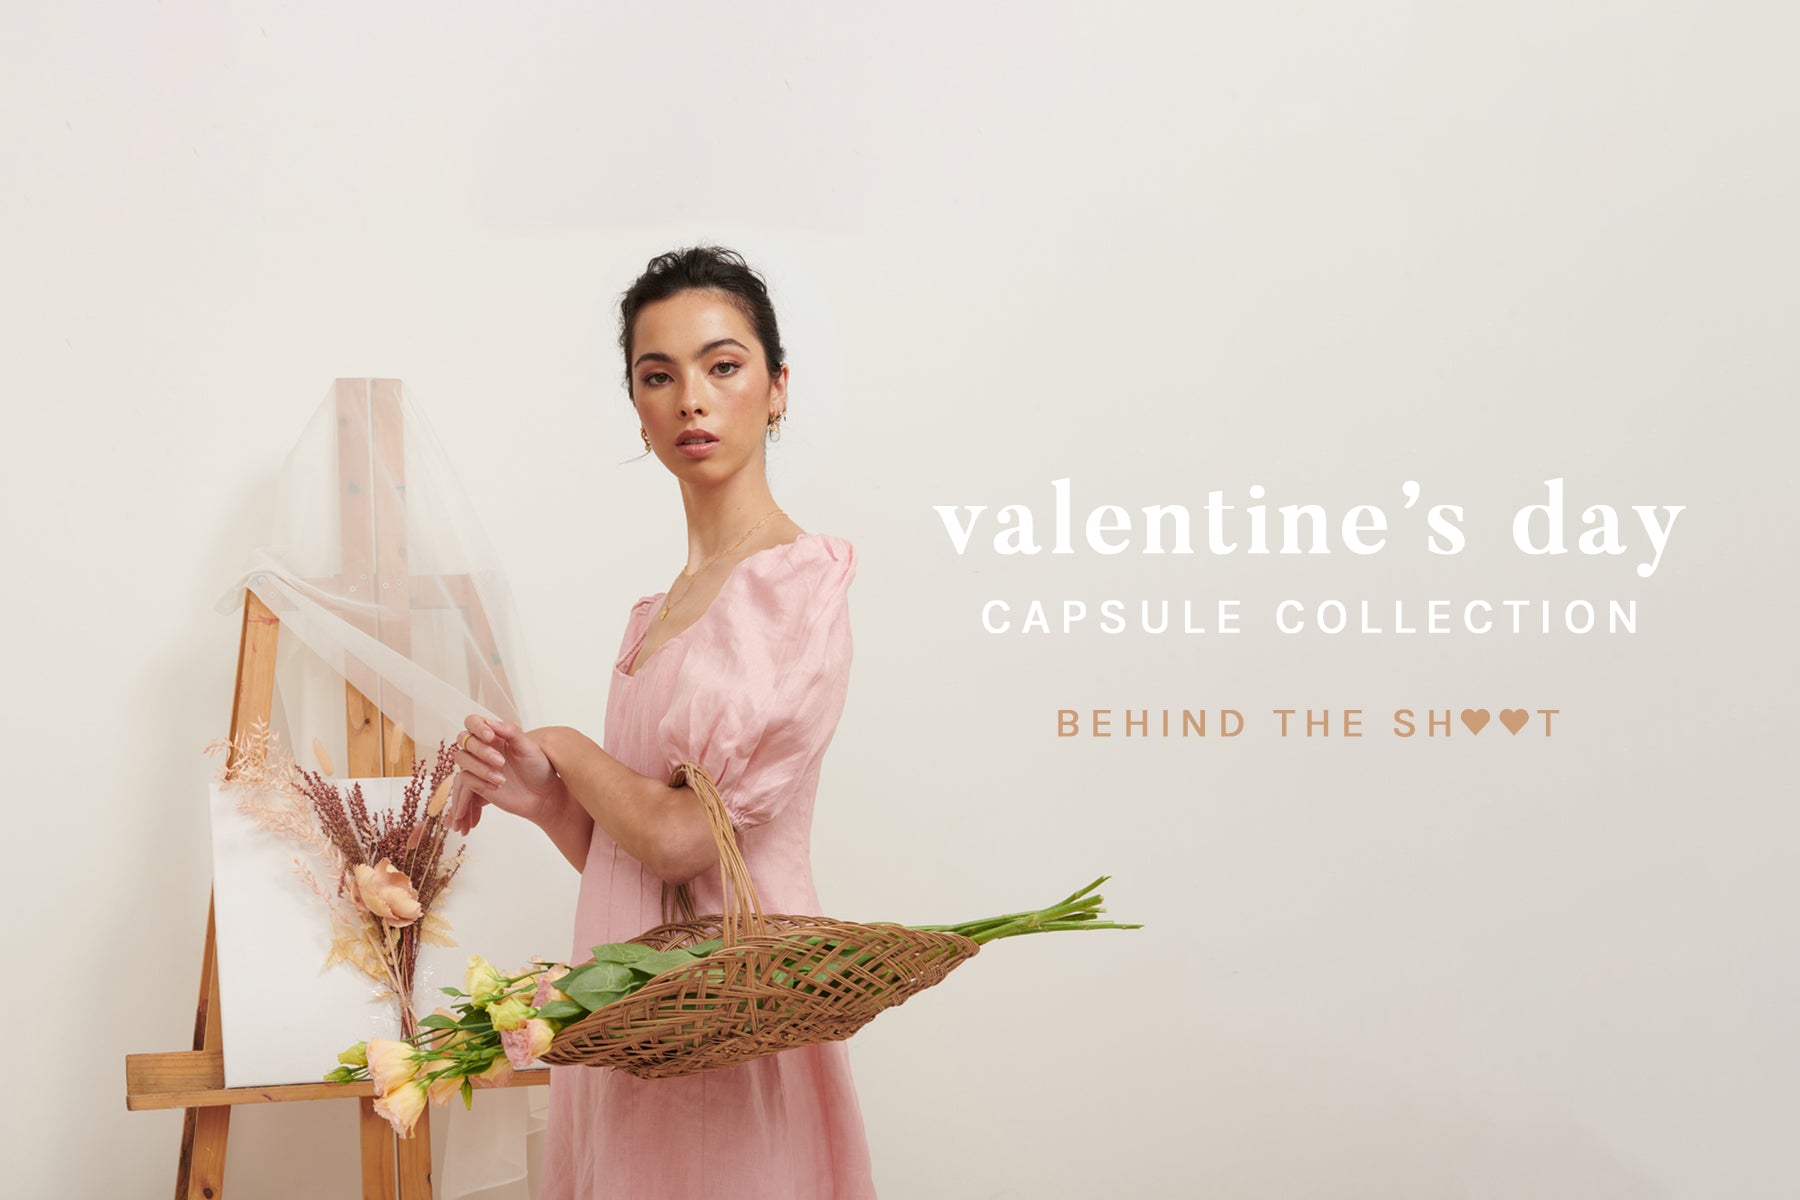 BEHIND THE SHOOT - Valentine's Day Capsule Collection